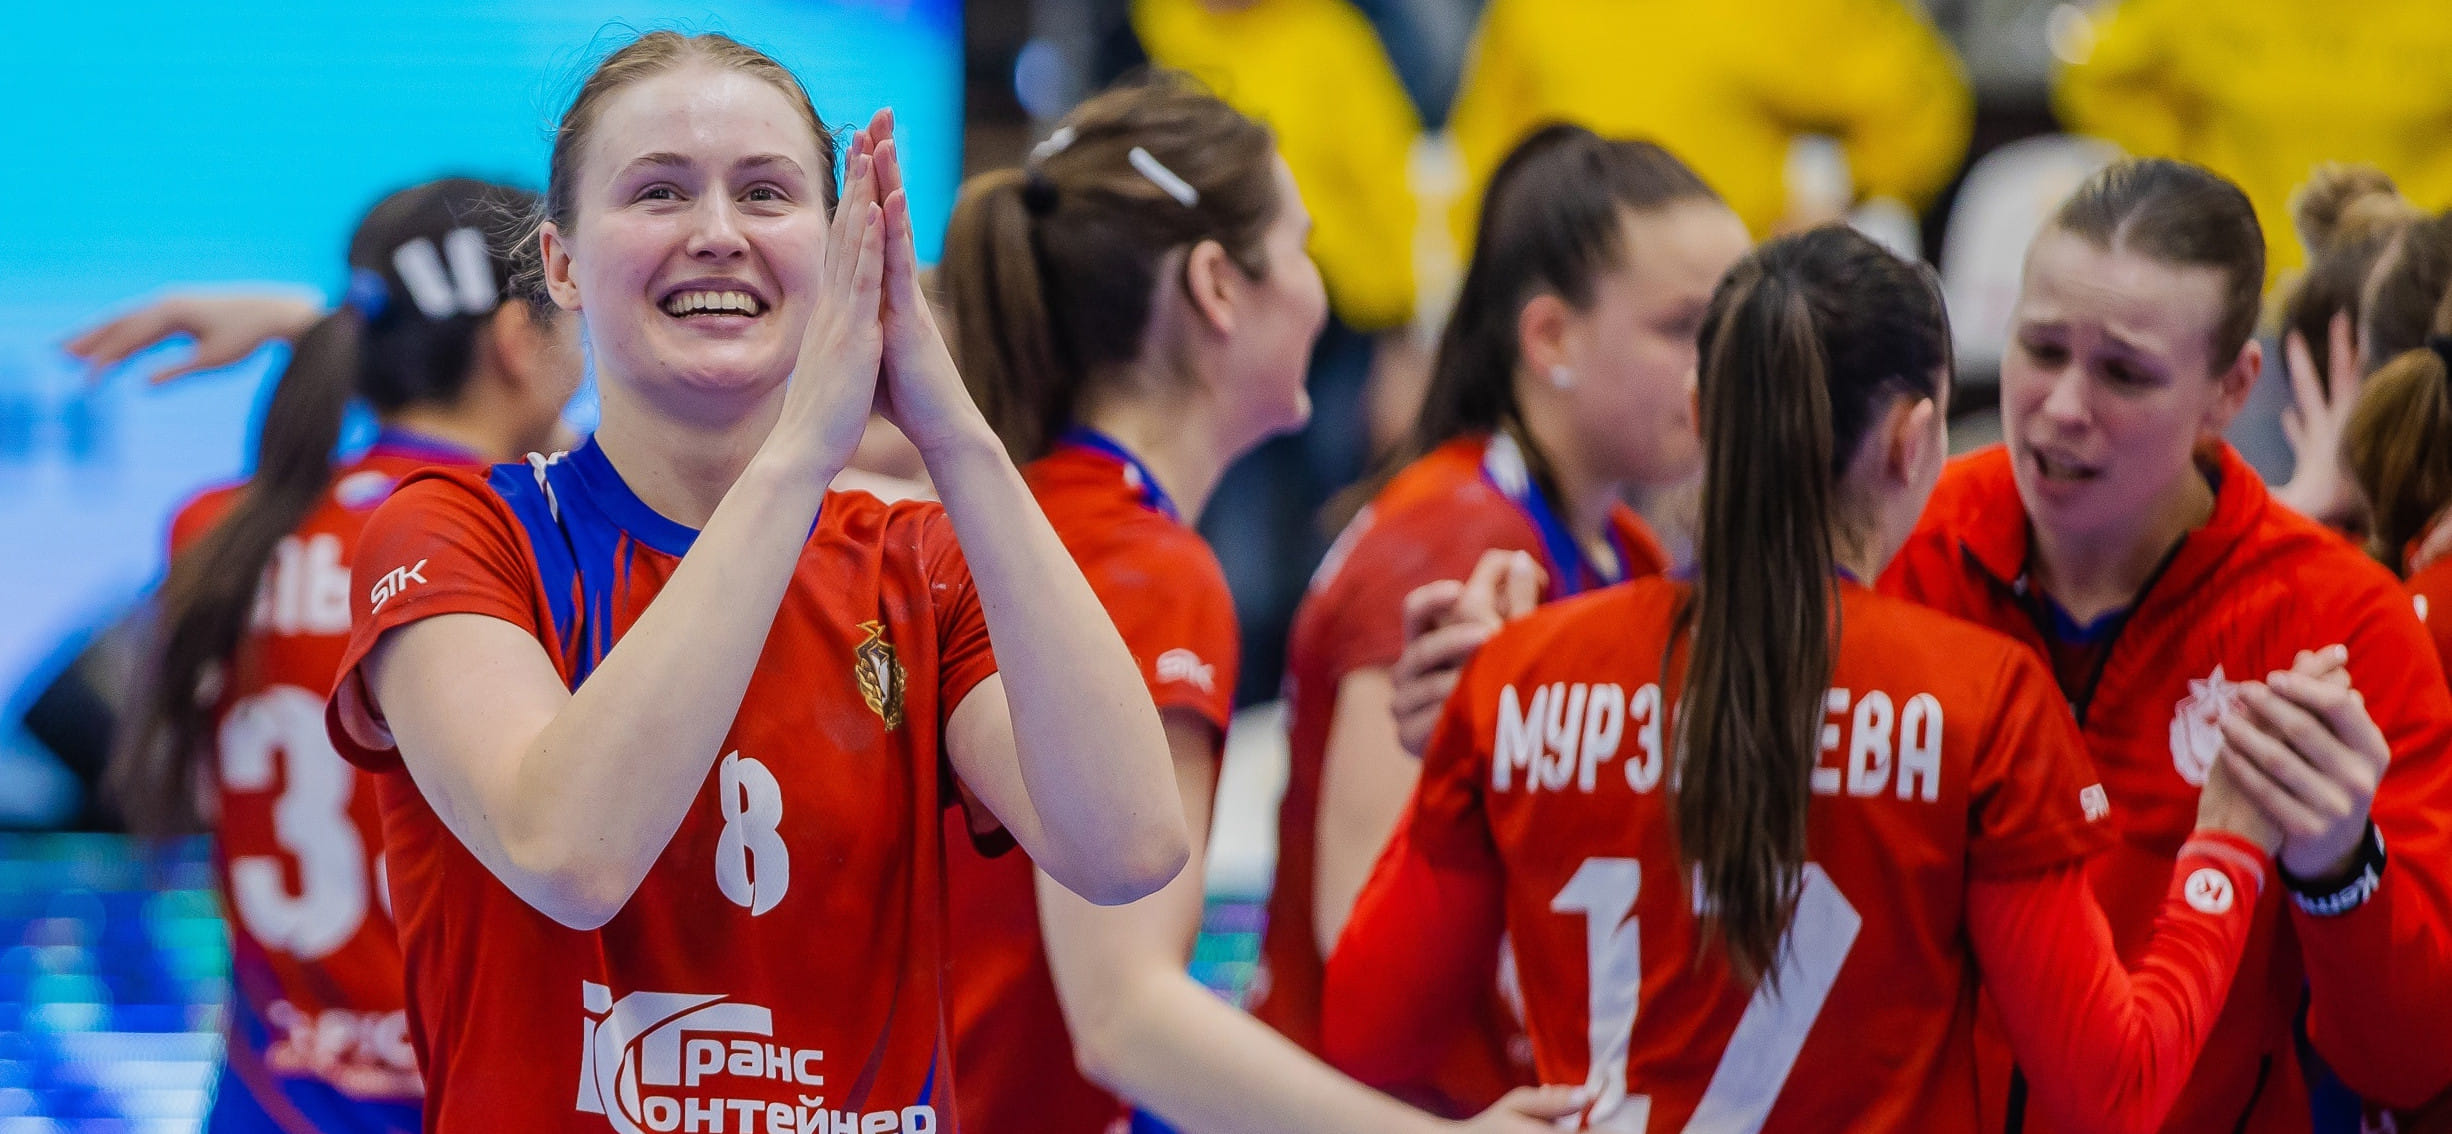 The best player of the season Elena Mikhaylichenko: "I want to live here and now, outside of professional sports"